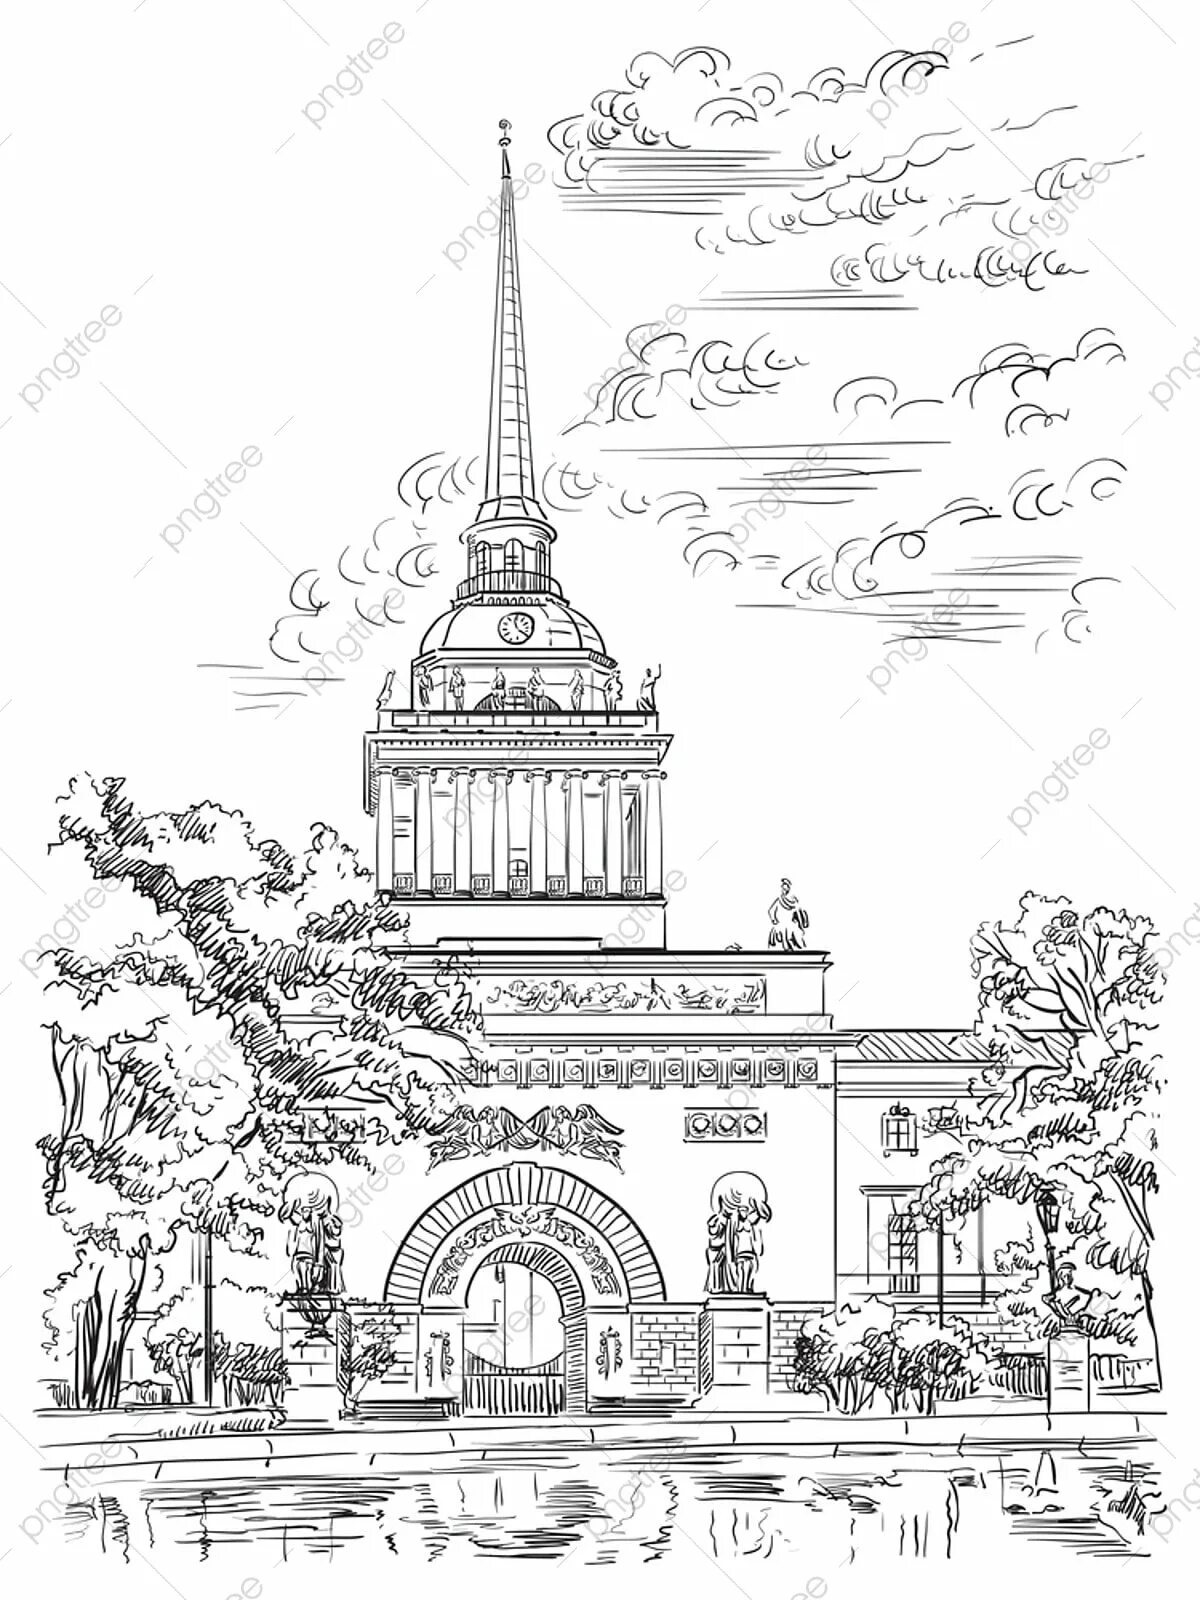 Calm admiralty coloring page